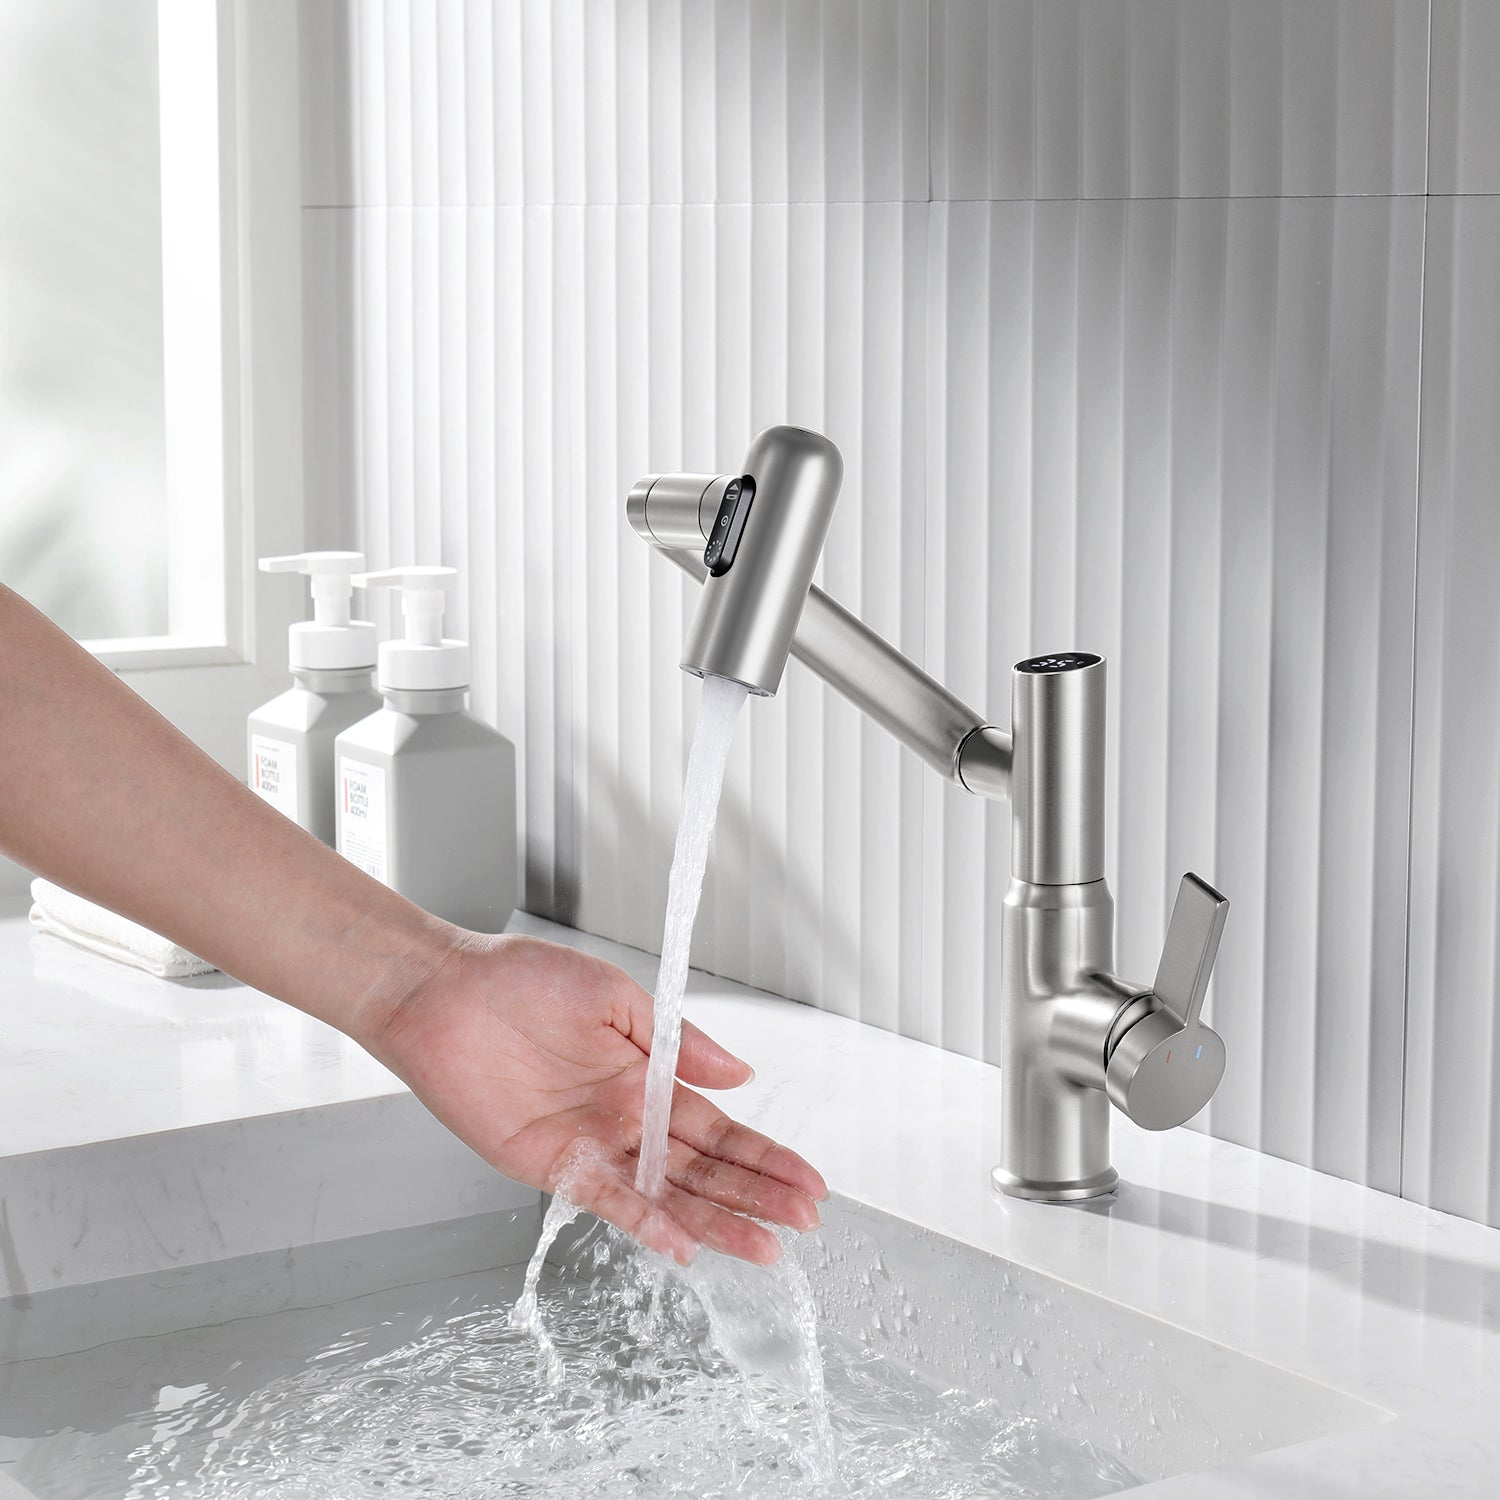 Lefton Single-Hole Rotatable Faucet with Temperature Display-BF2204 -Bathroom Faucets- Lefton Home